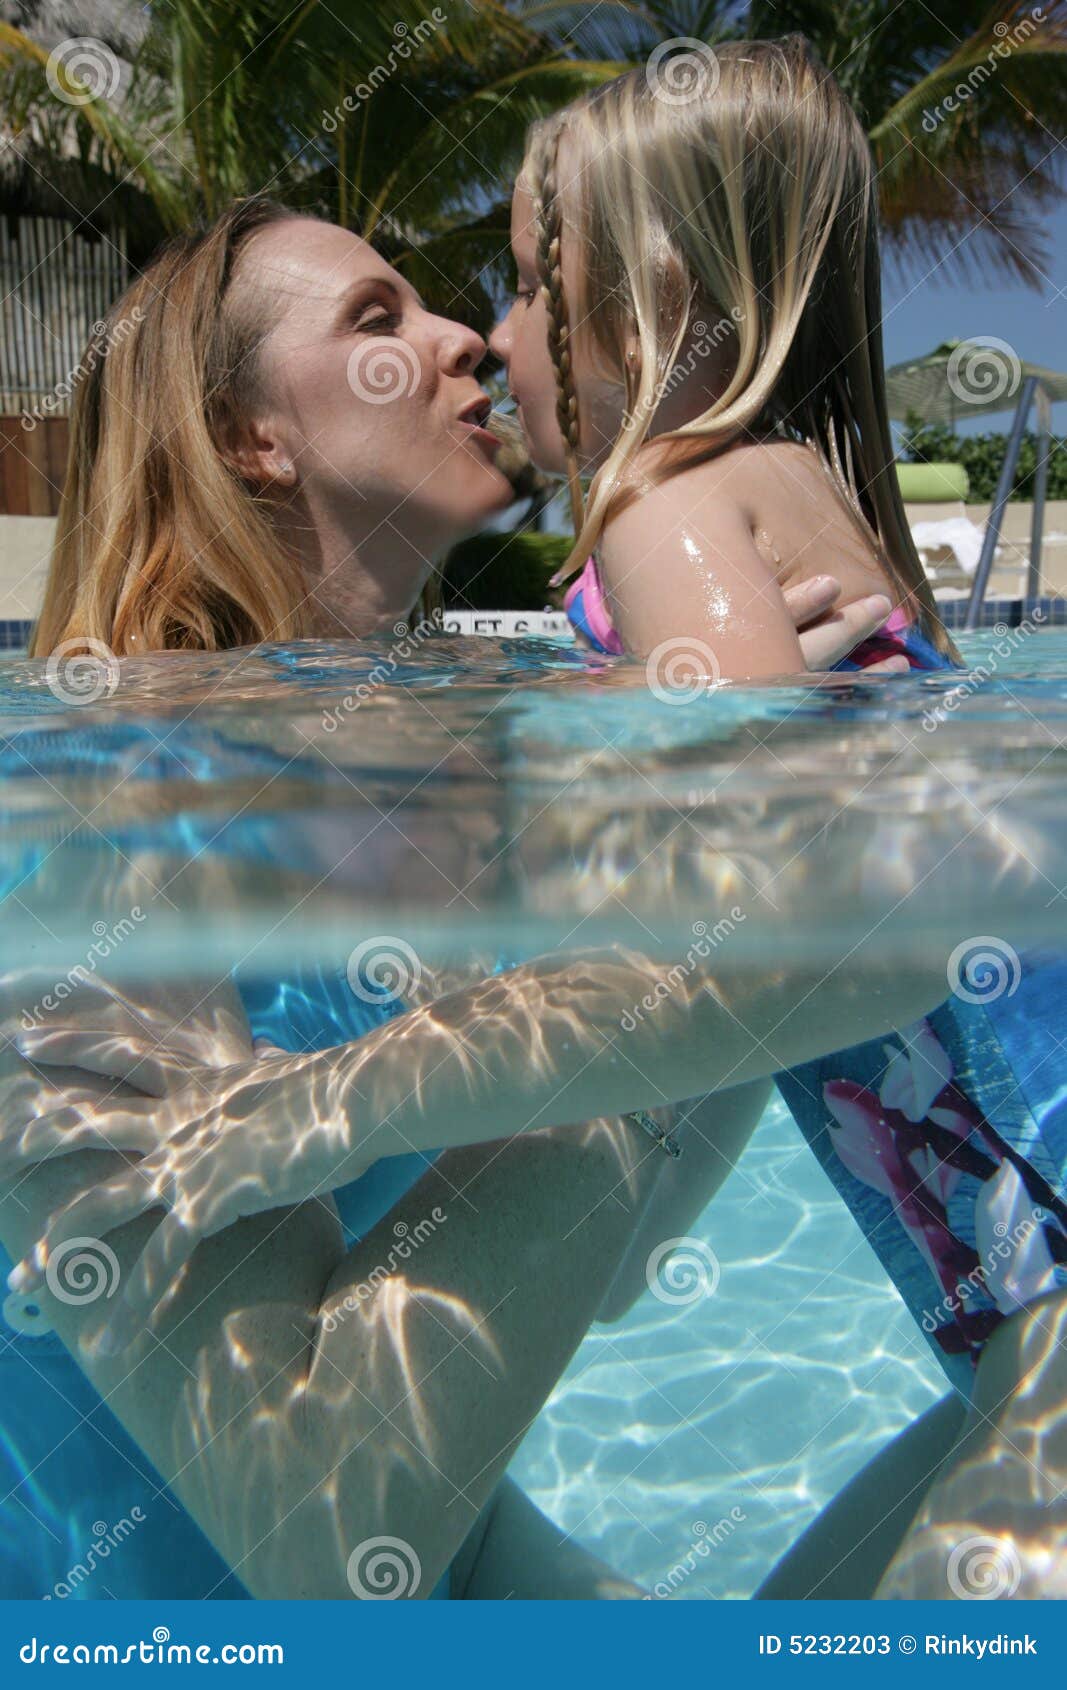 Mom and daughter kissing hot